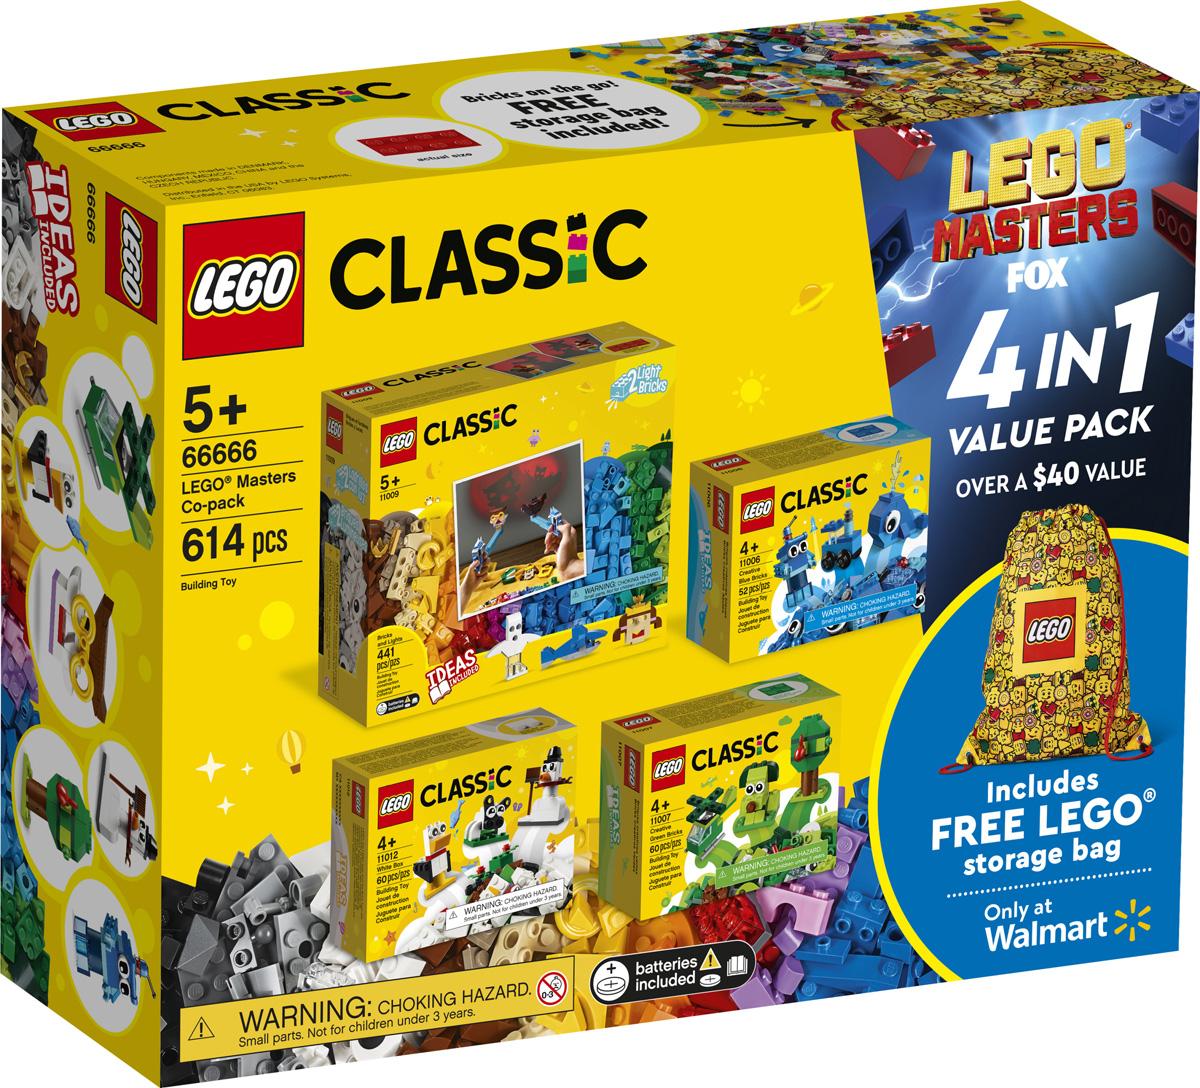 614-Piece Lego Masters Classic 4-in-1 Value Pack for $25